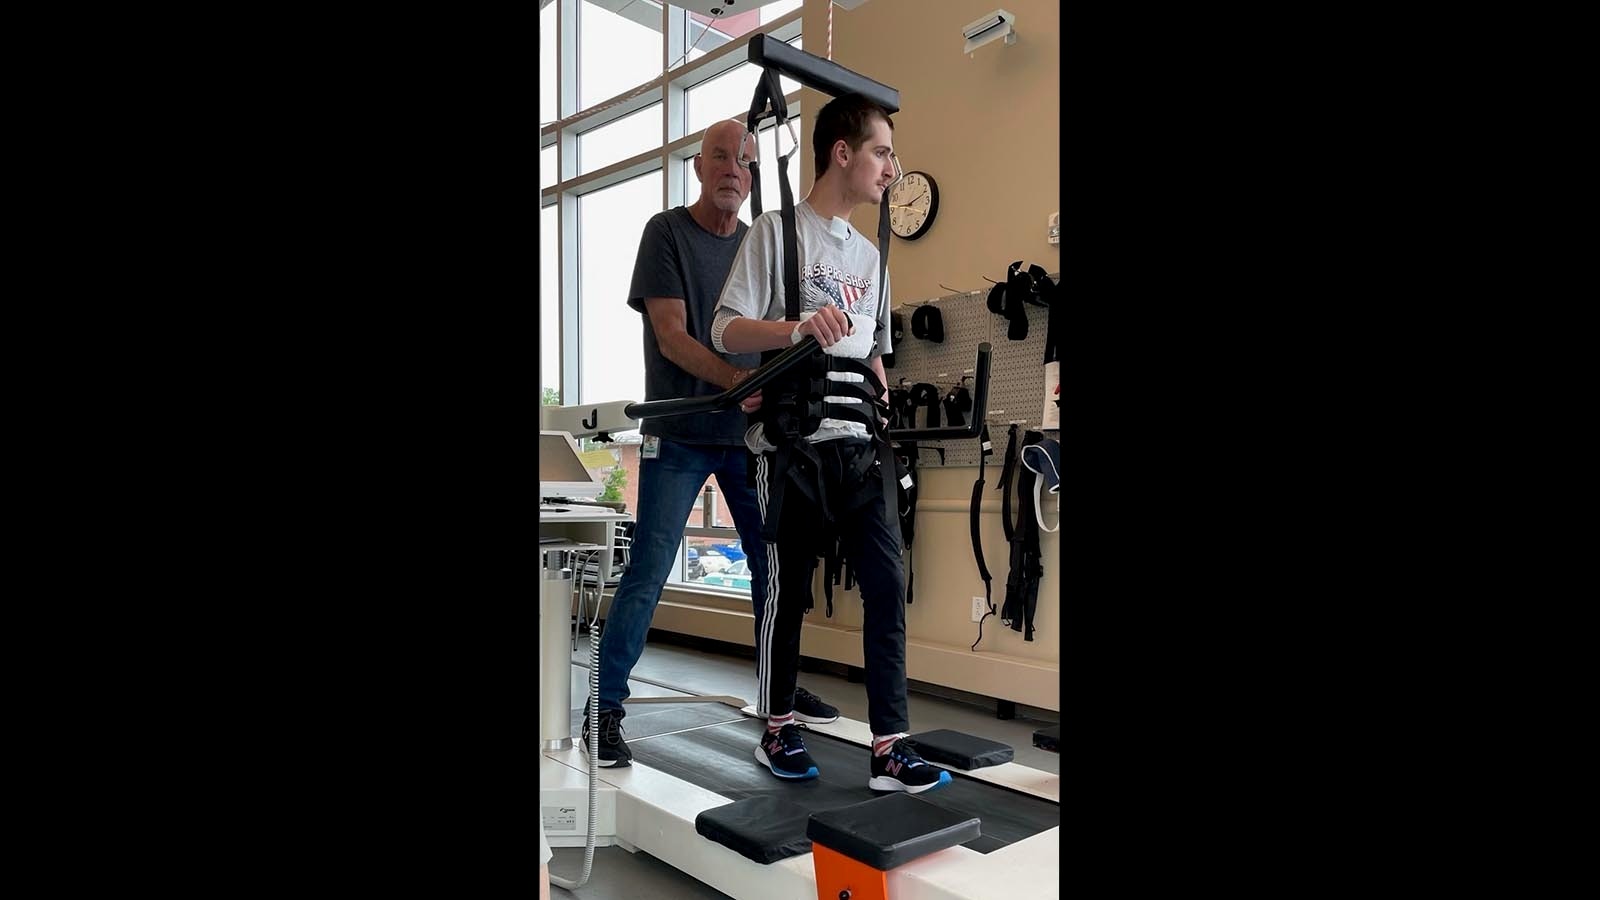 Gavan Bethel had to learn to walk again following a severe brain injury that resulted from an accident last May. Here he works on rehab at Craig Hospital in Englewood, Colorado.